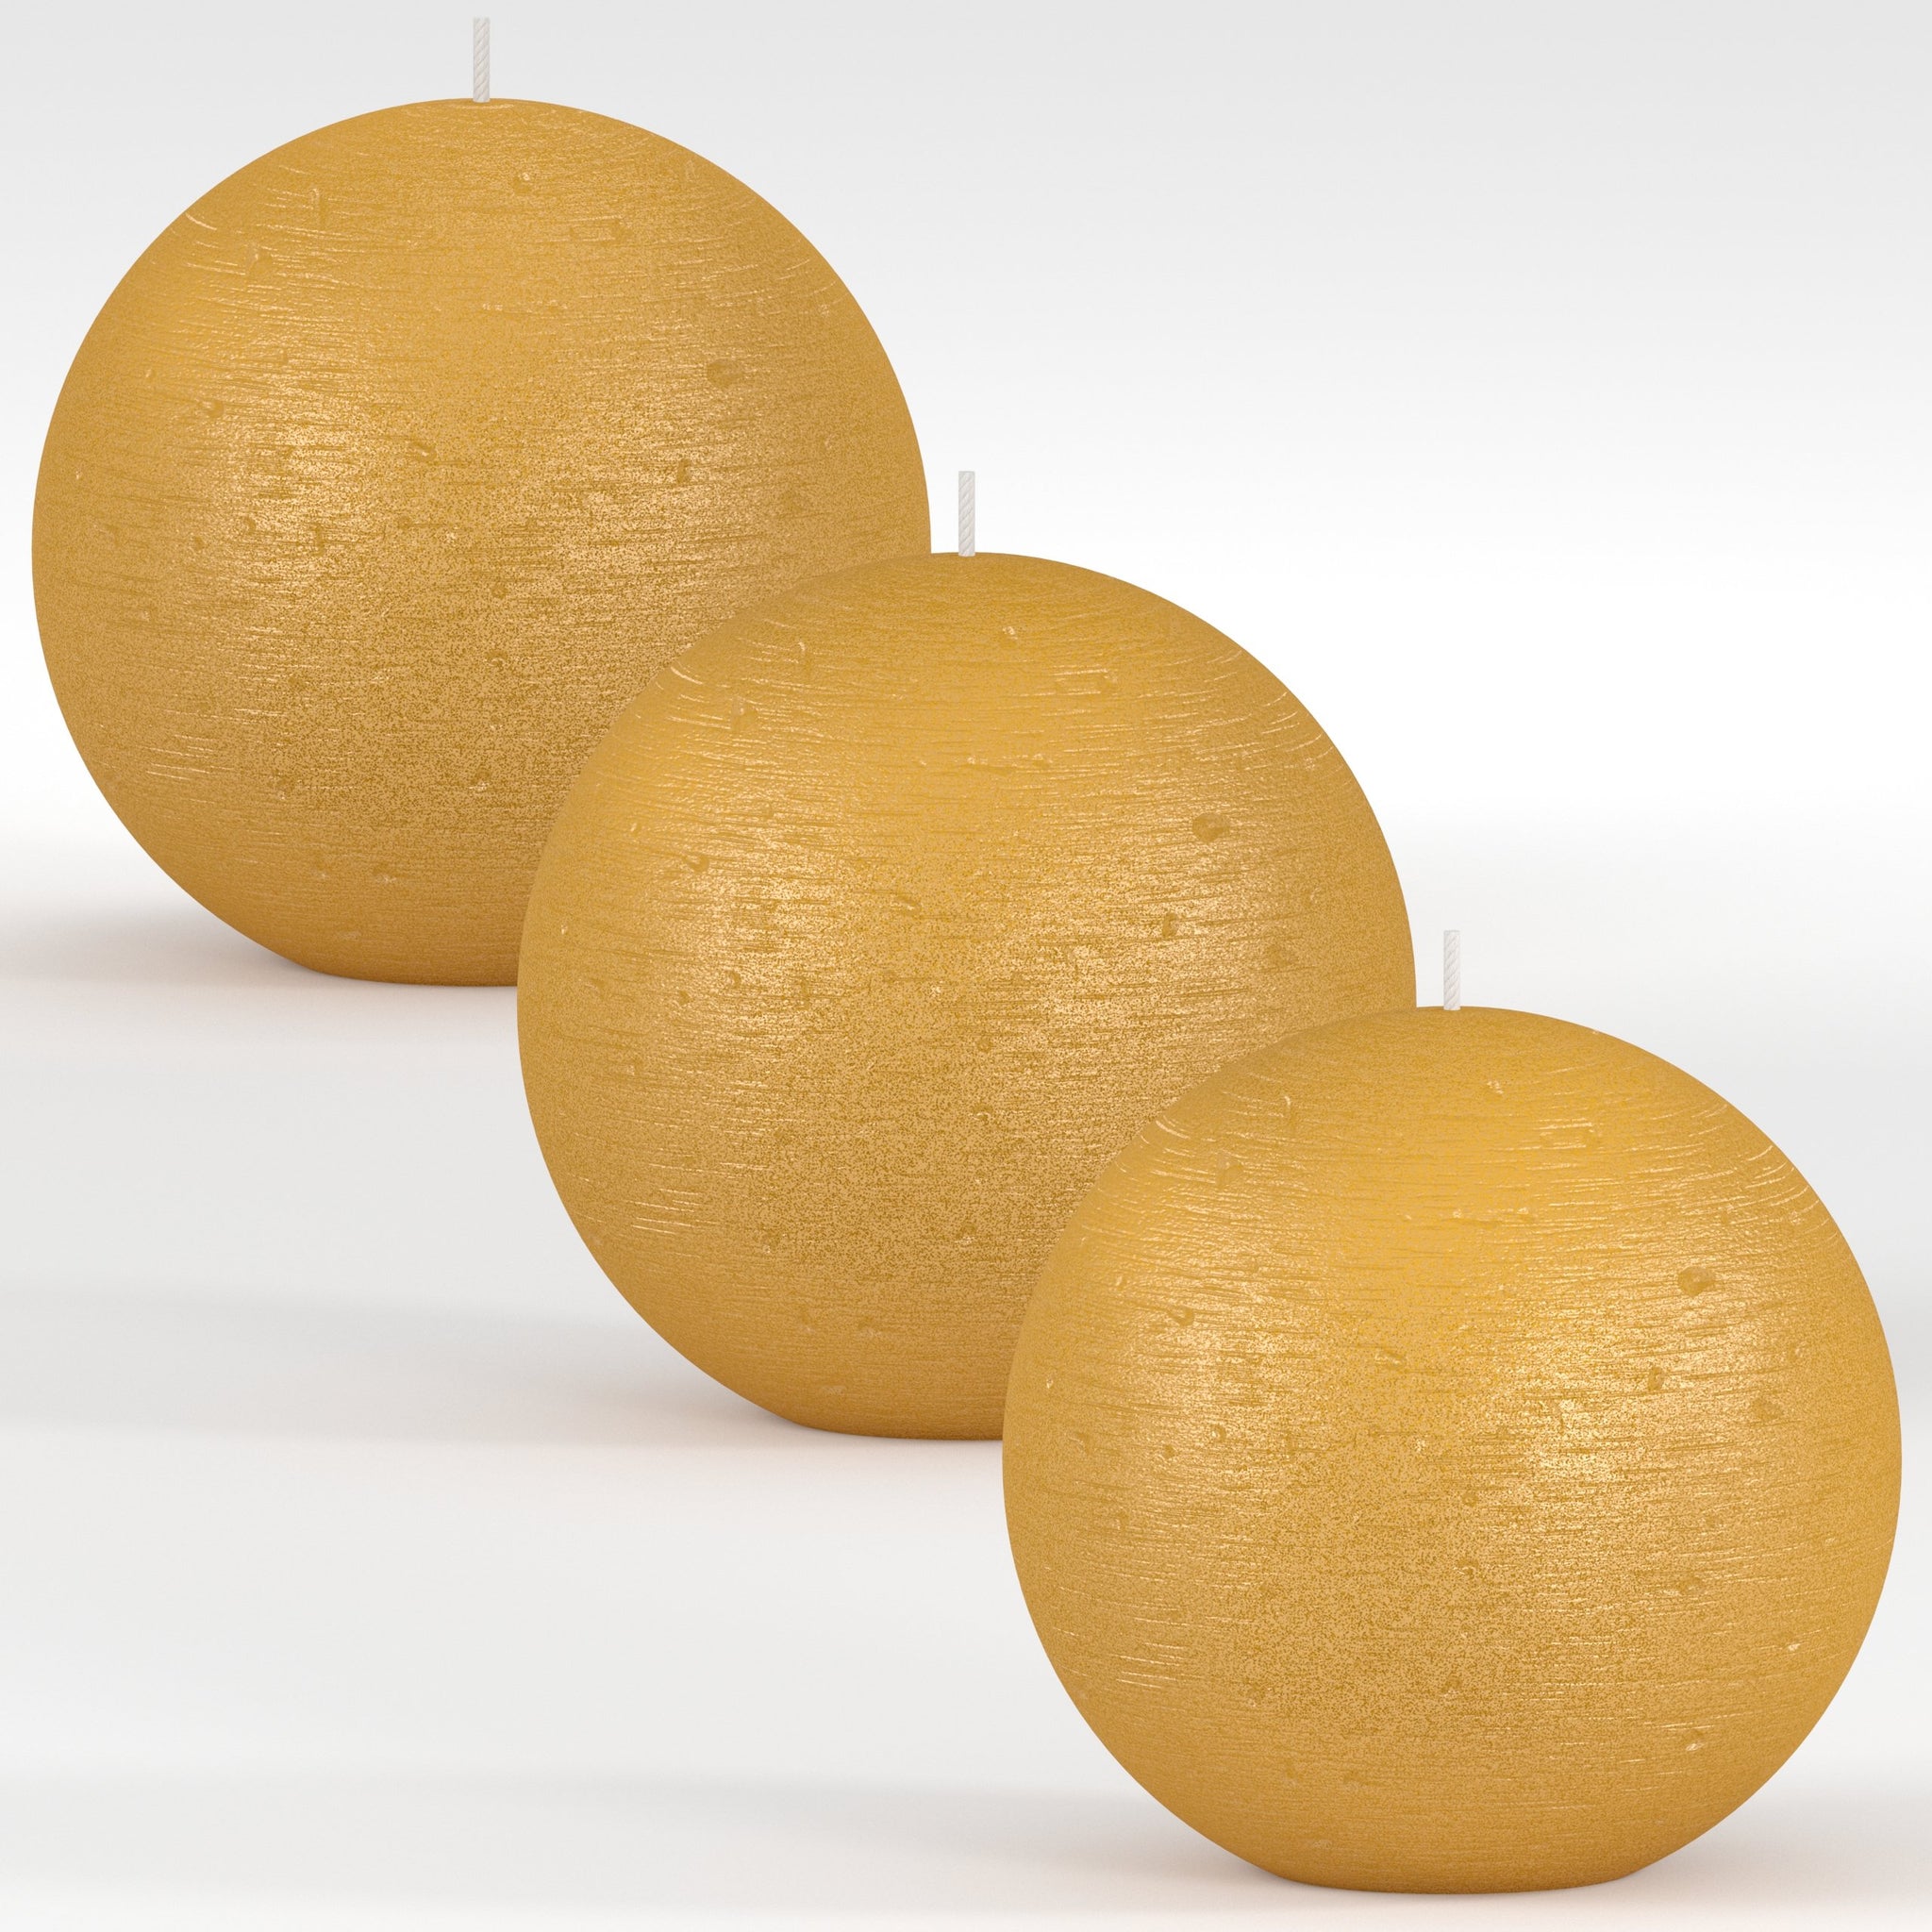 CANDWAX Gold Round Candles 3" - Set of 3 pcs